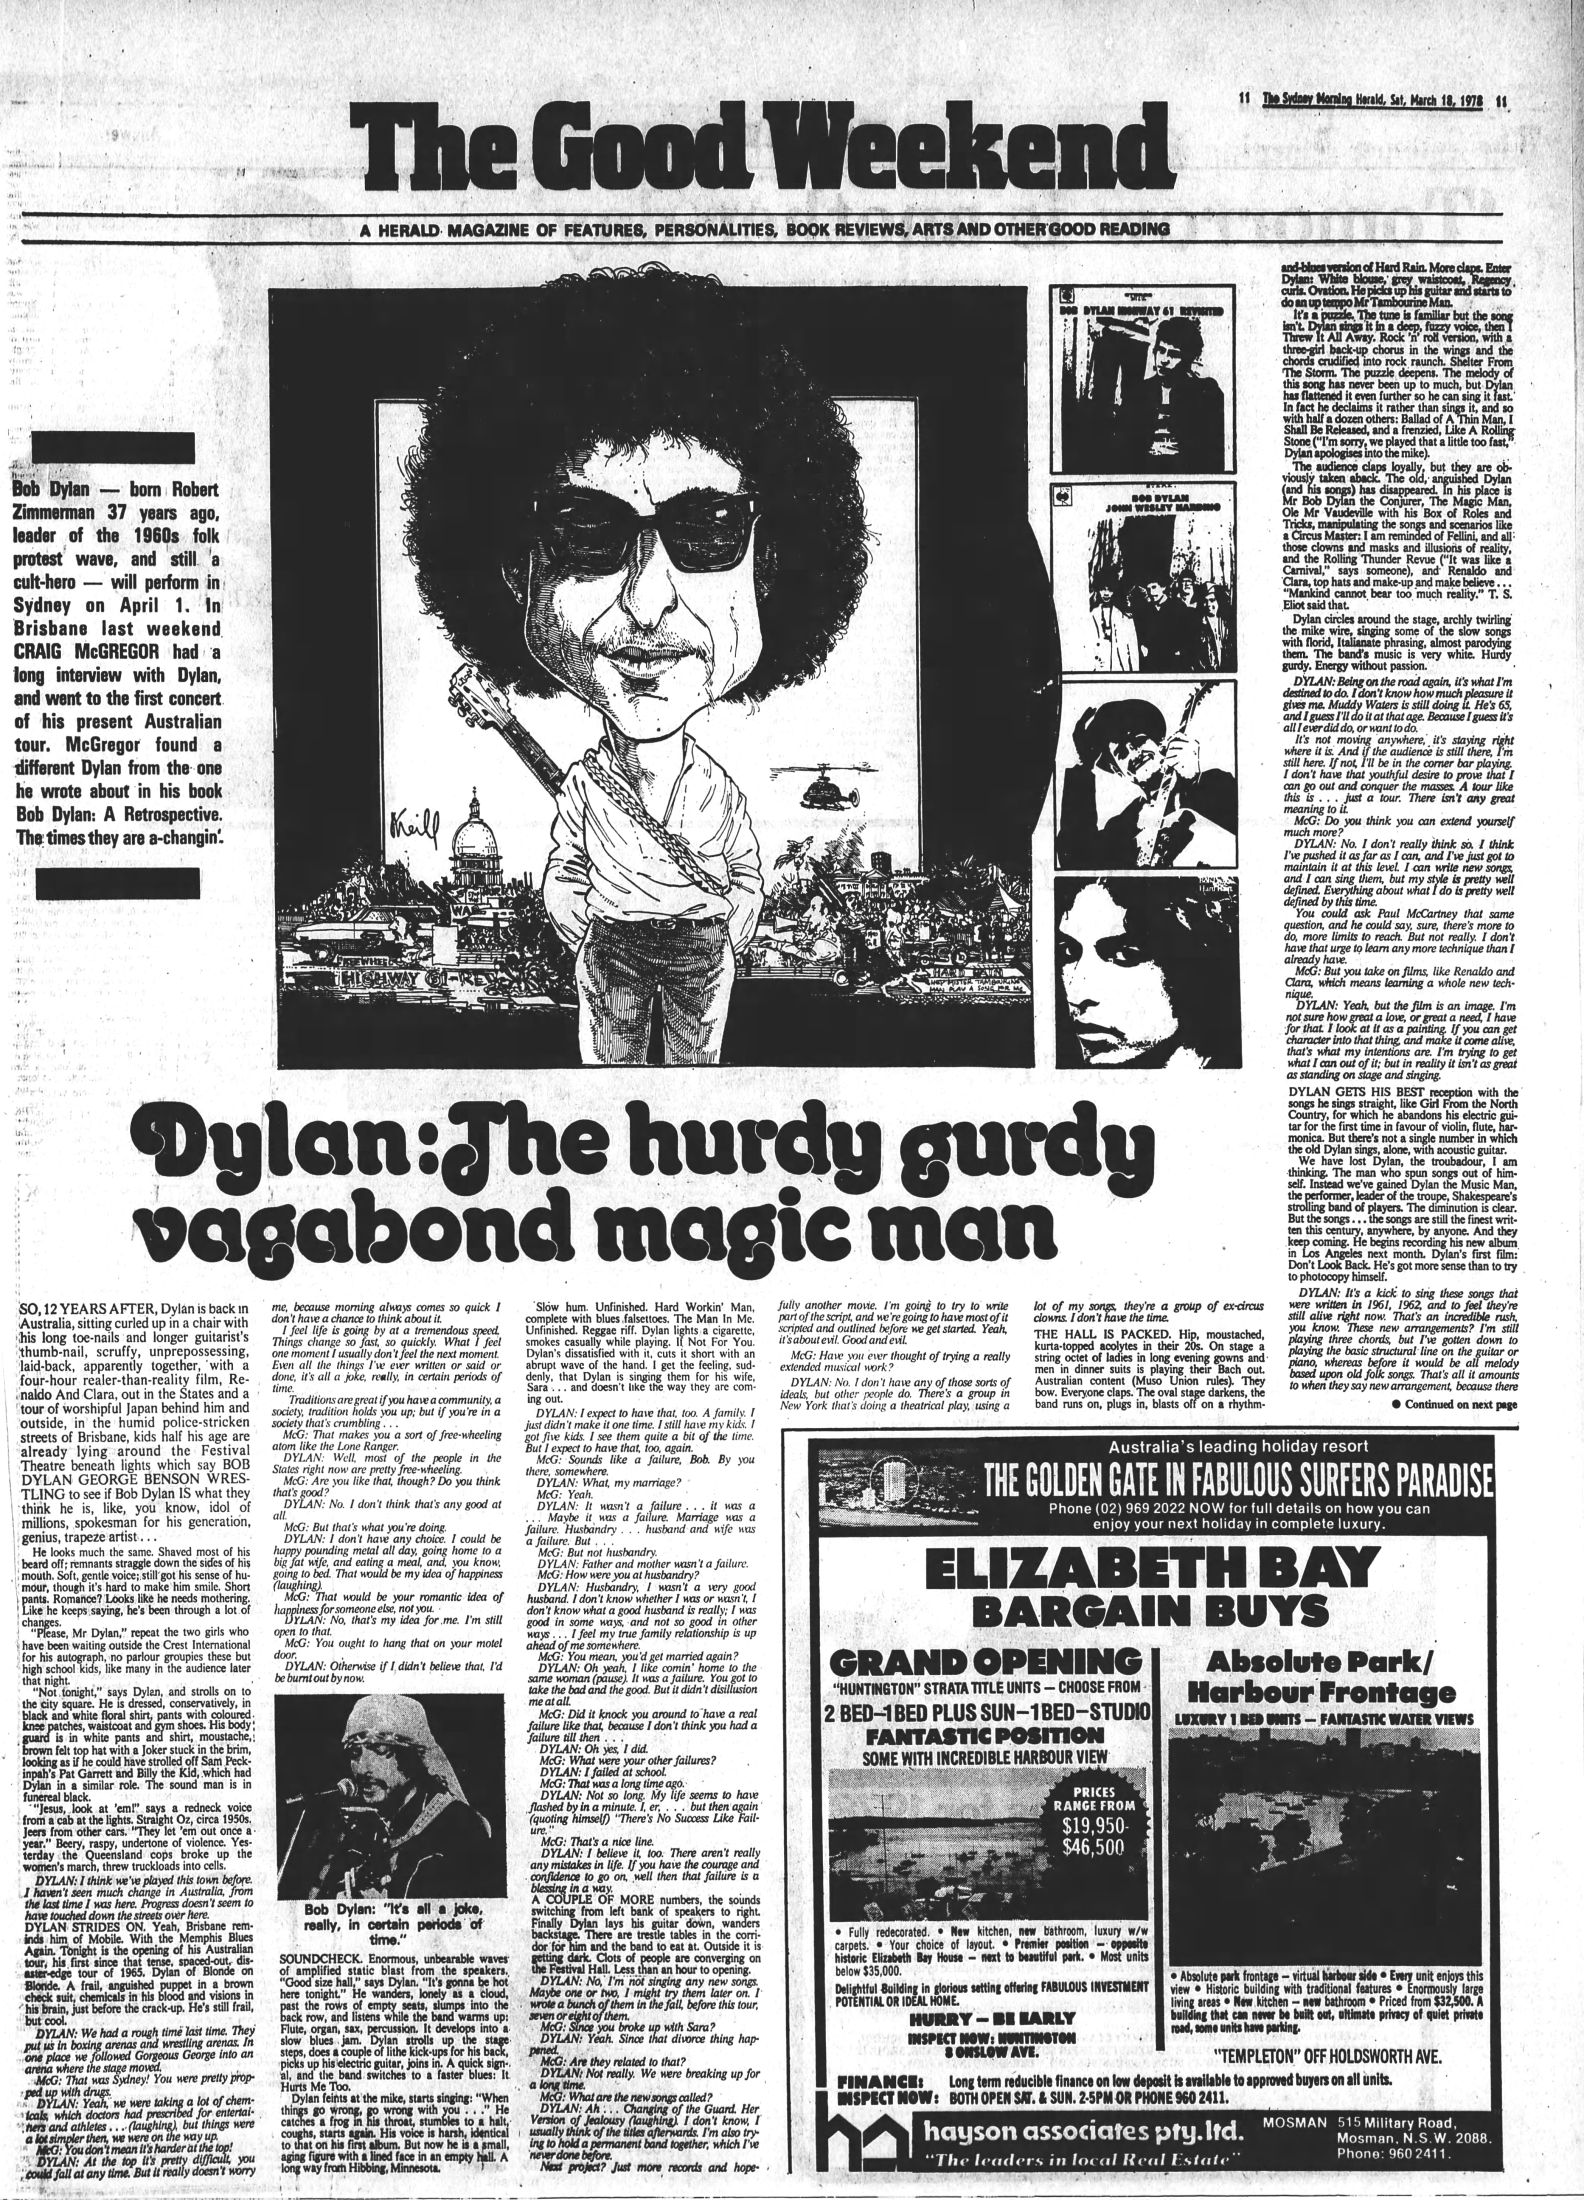 the sydney morning herald March 1978 Bob Dylan cover story